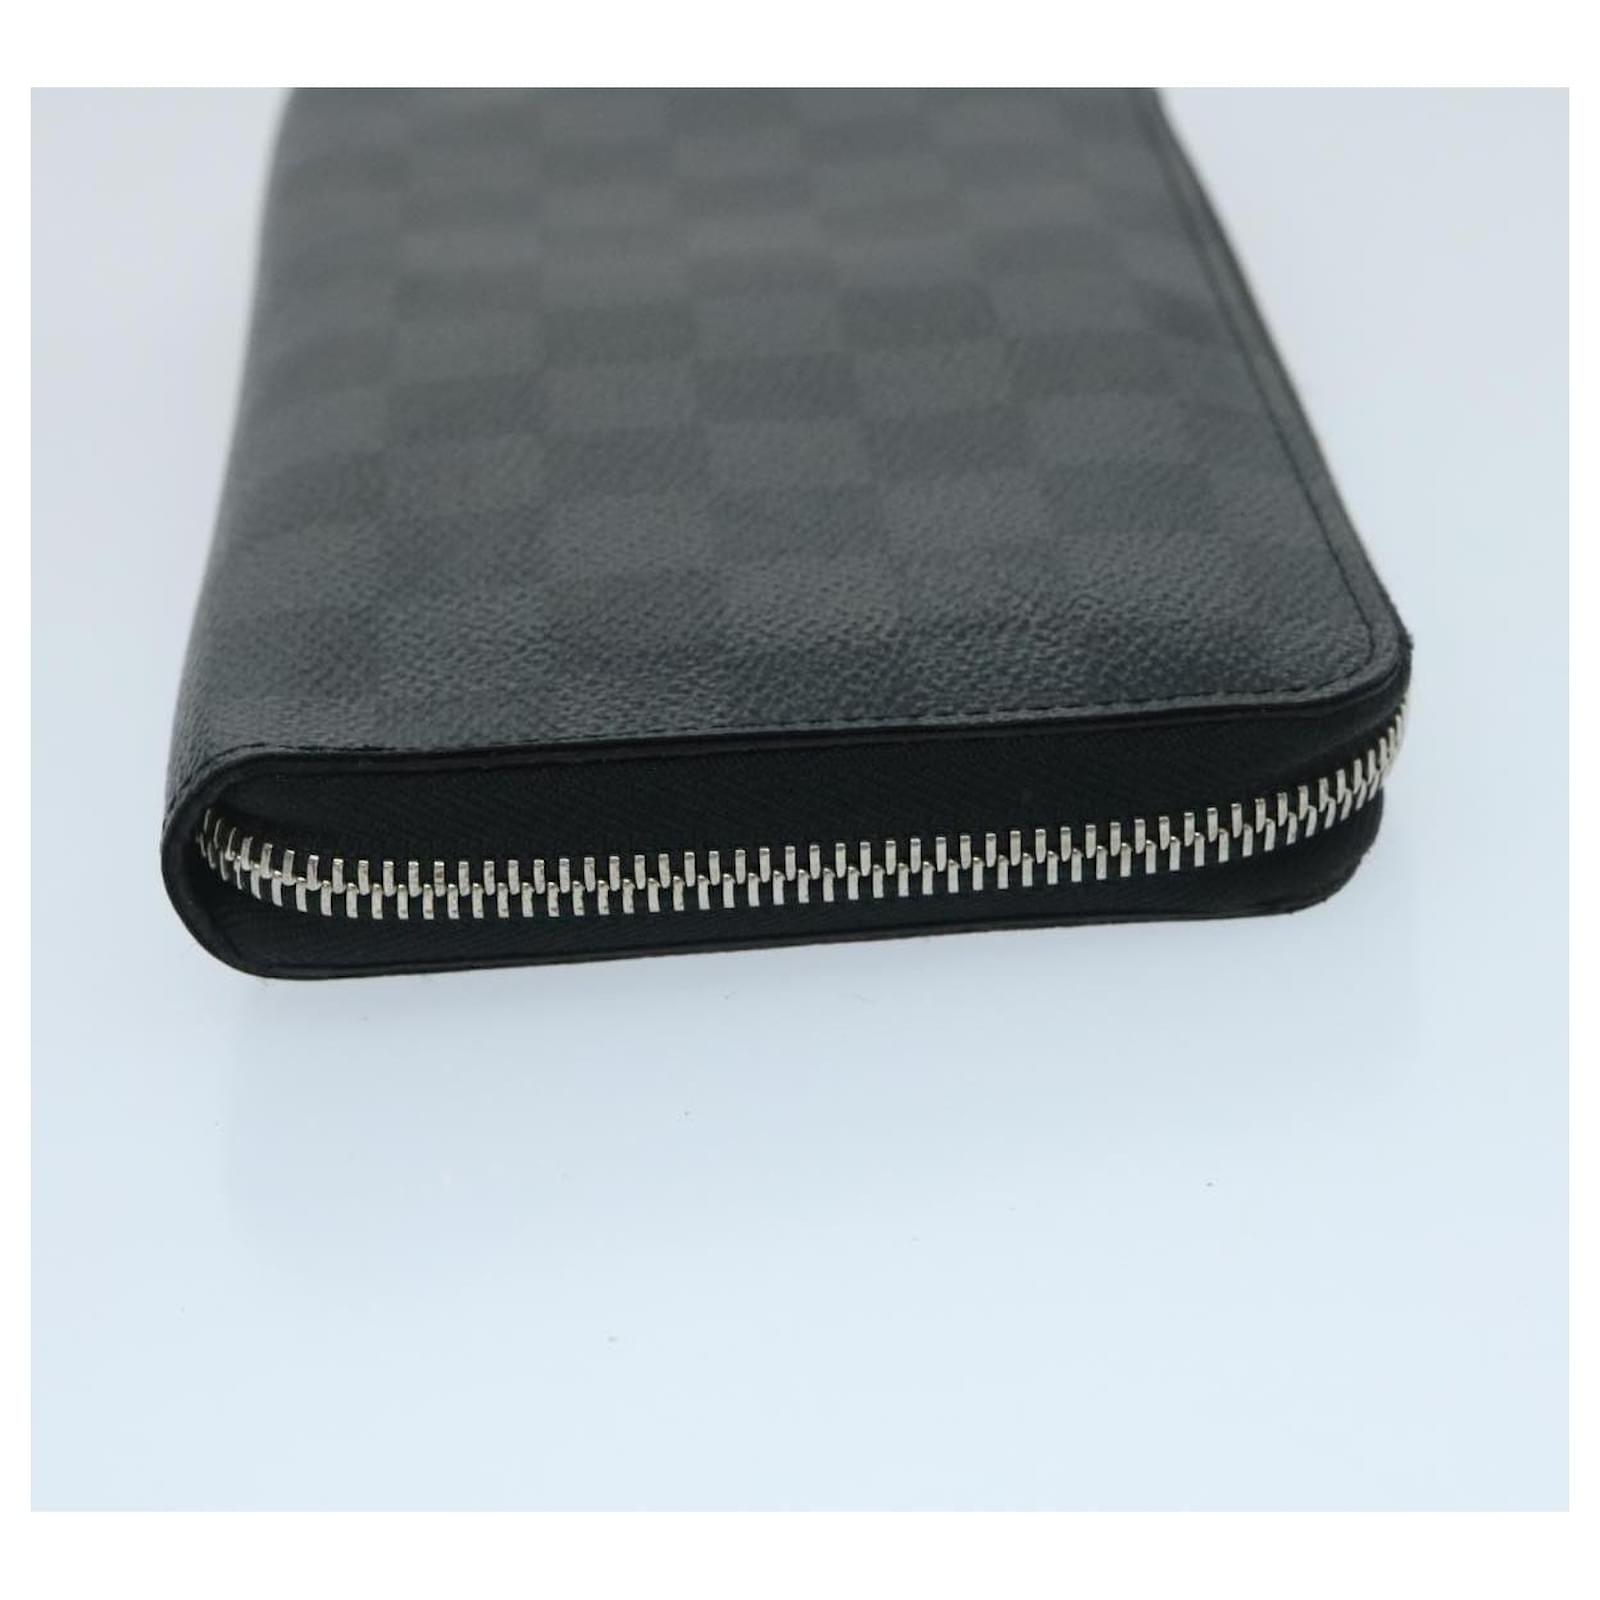 Zippy Organiser Damier Graphite Canvas - Wallets and Small Leather Goods  N60111